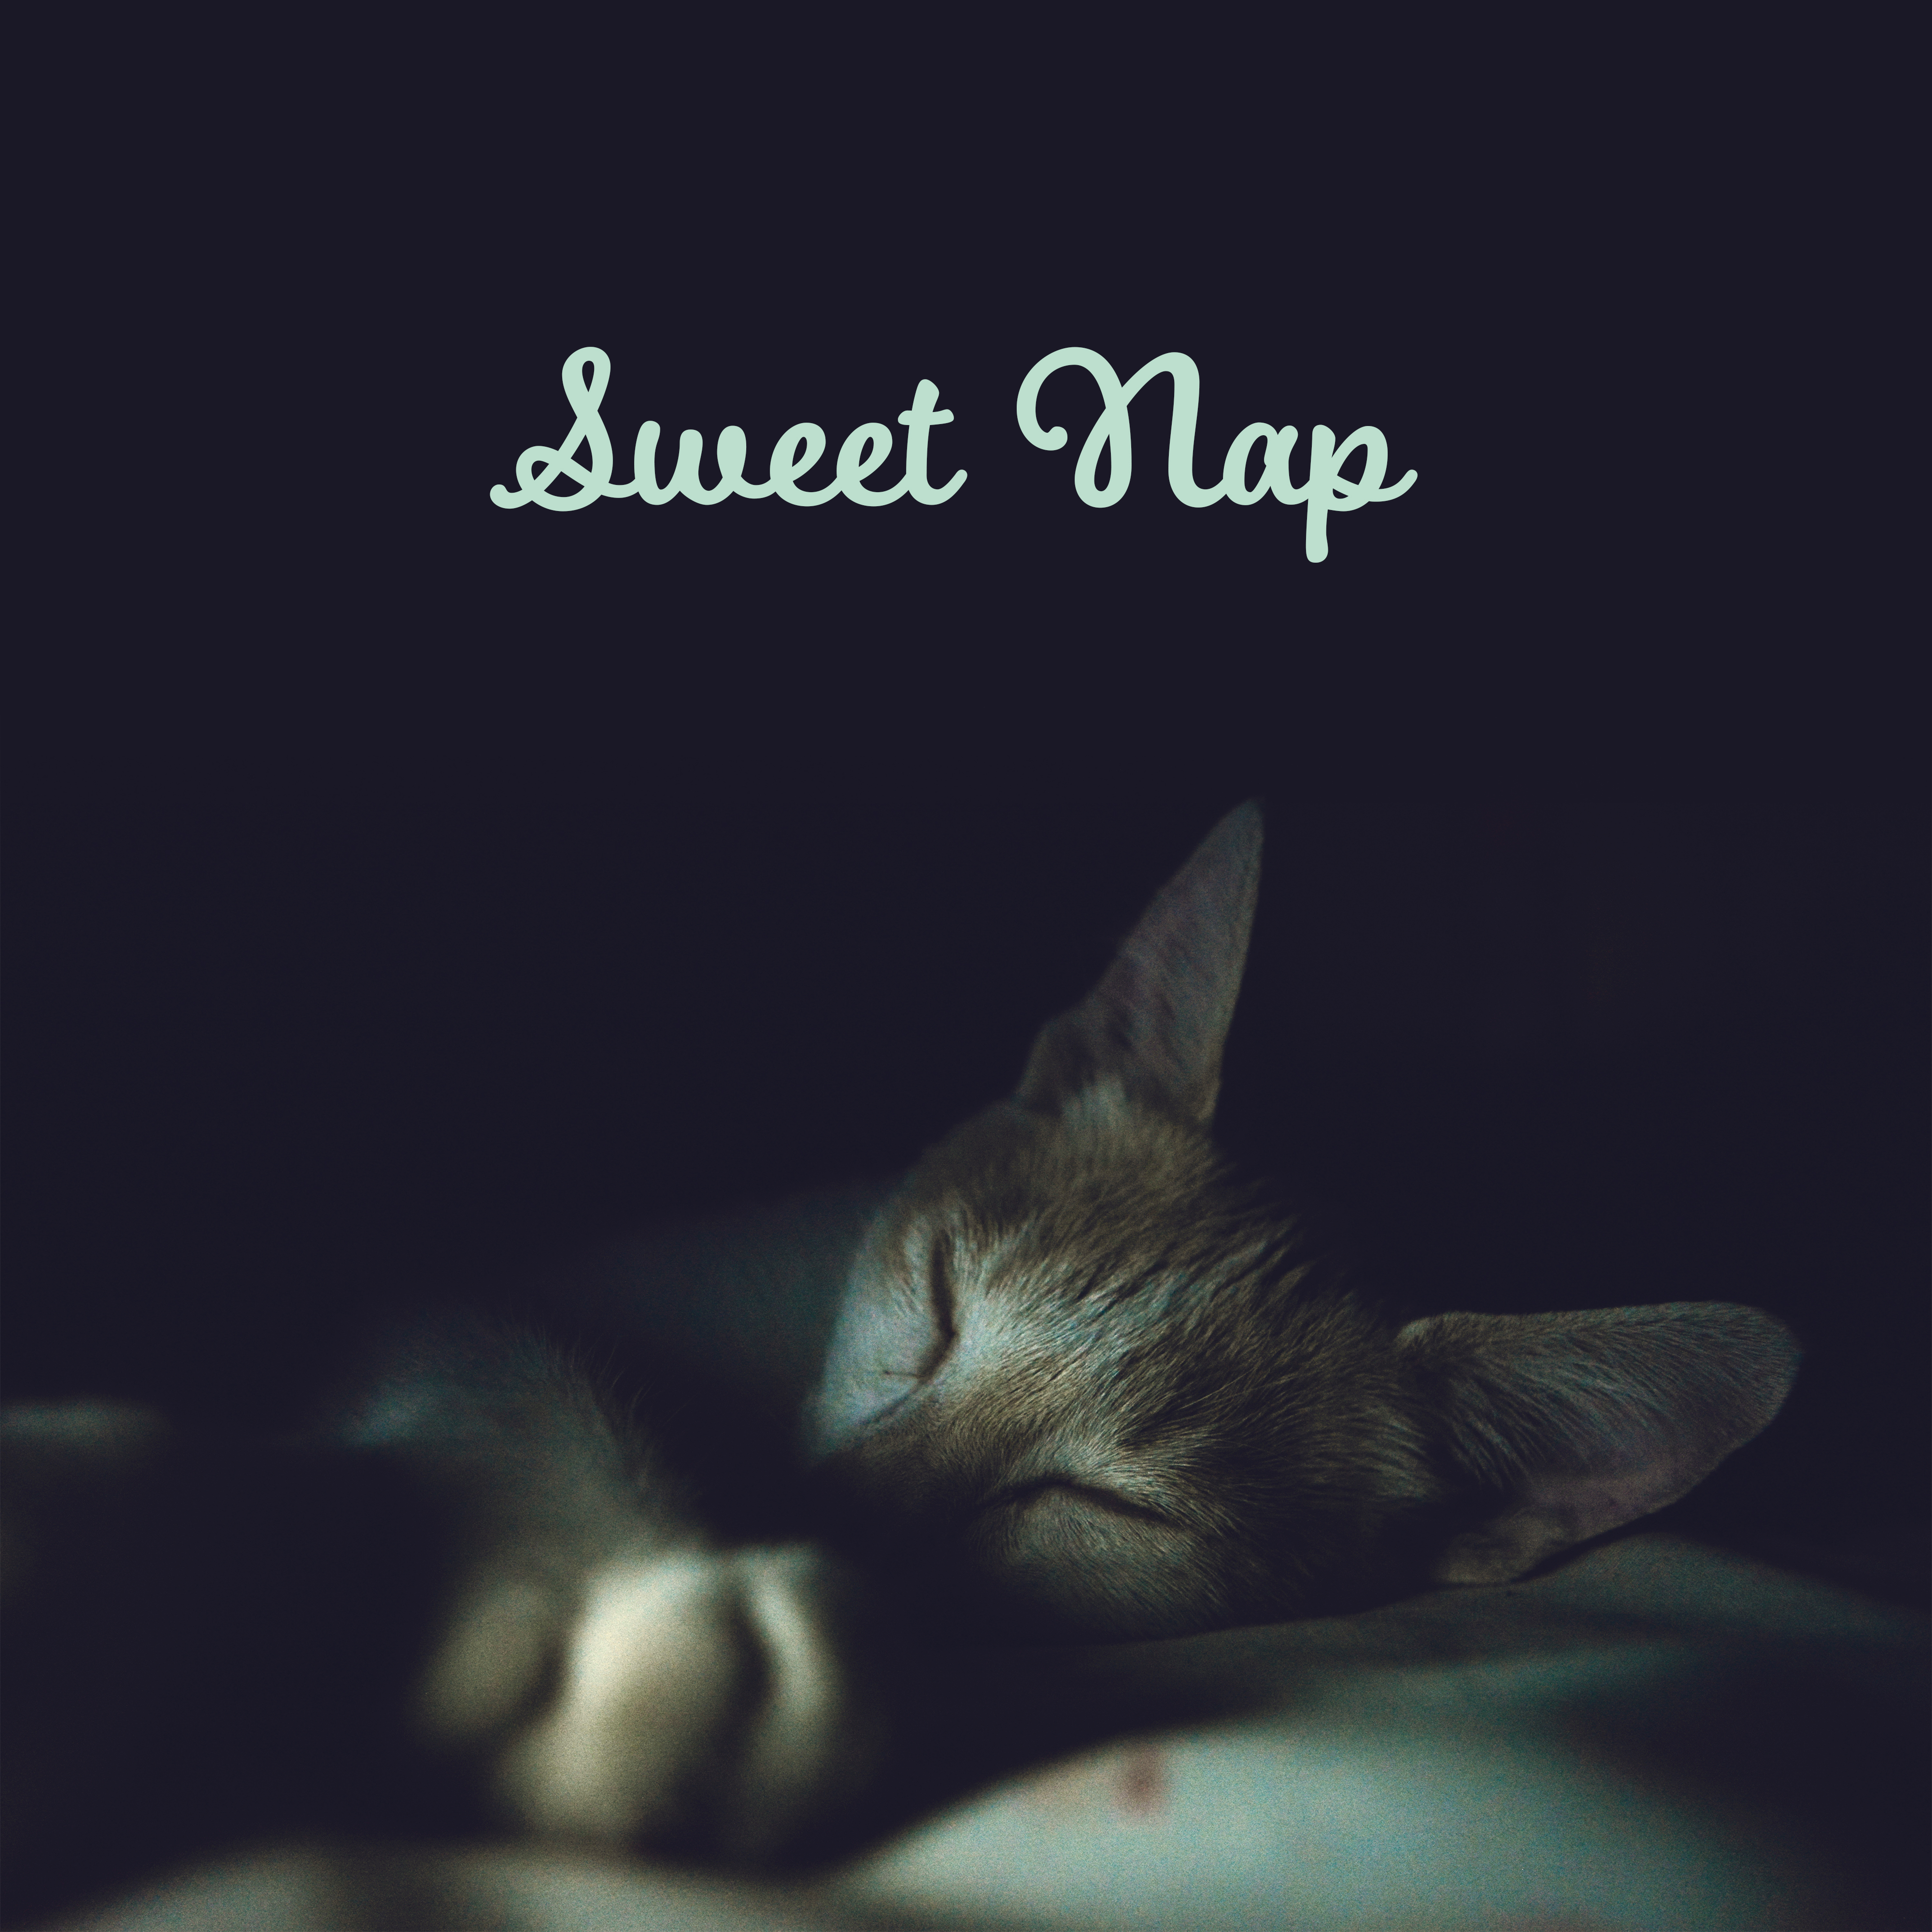 Sweet Nap – Peaceful Sounds for Sleep, Relaxation, Healing, Zen, Relief, Tranquil Sleep, Music to Pillow, Deep Dreams, Relaxing Bedtime